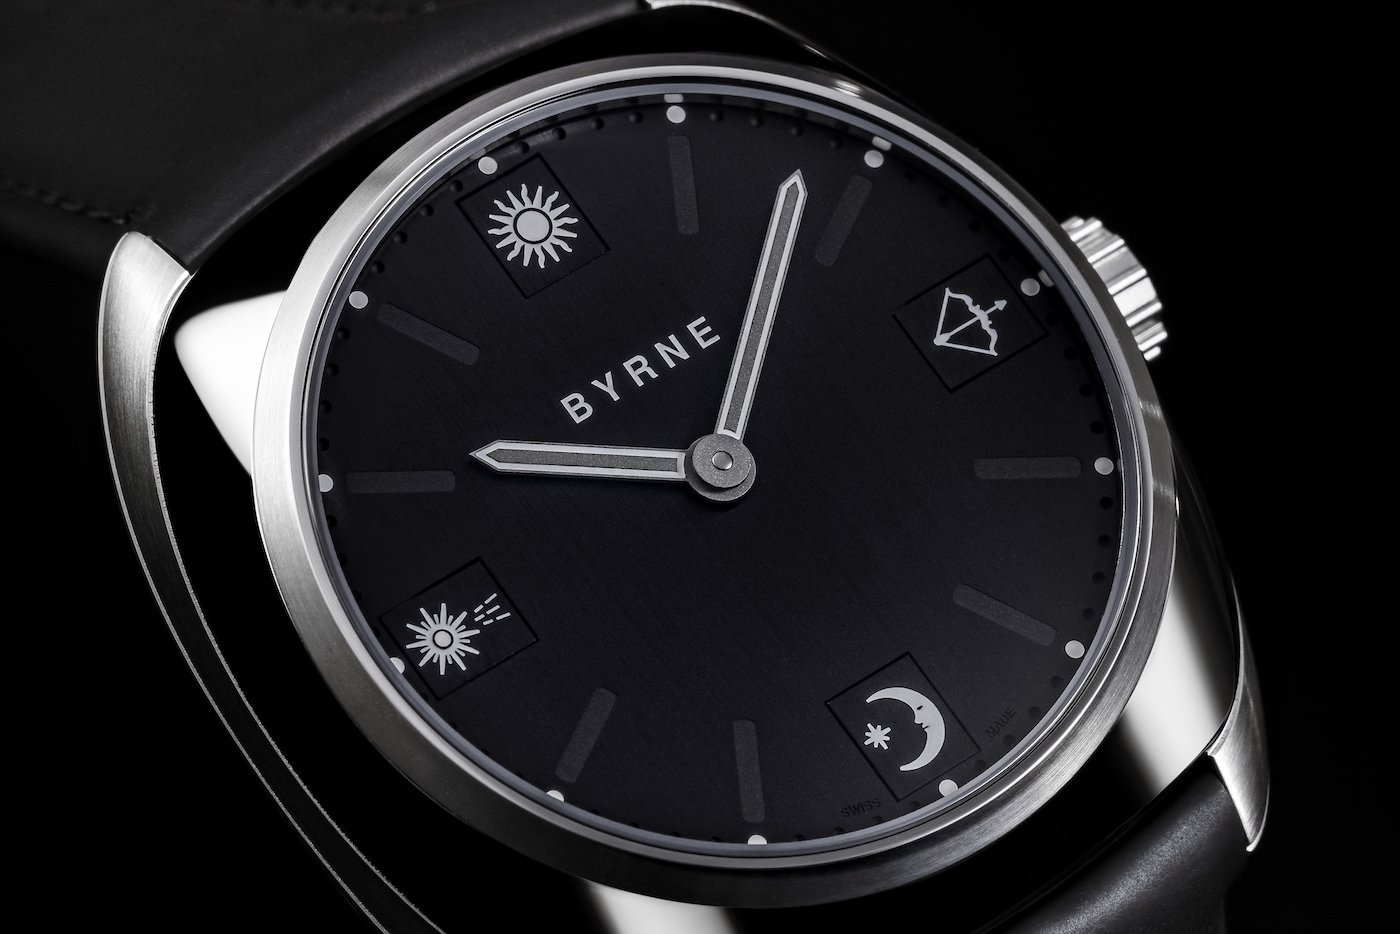 Byrne Watch offers next-level dial customisation to the GyroDial 